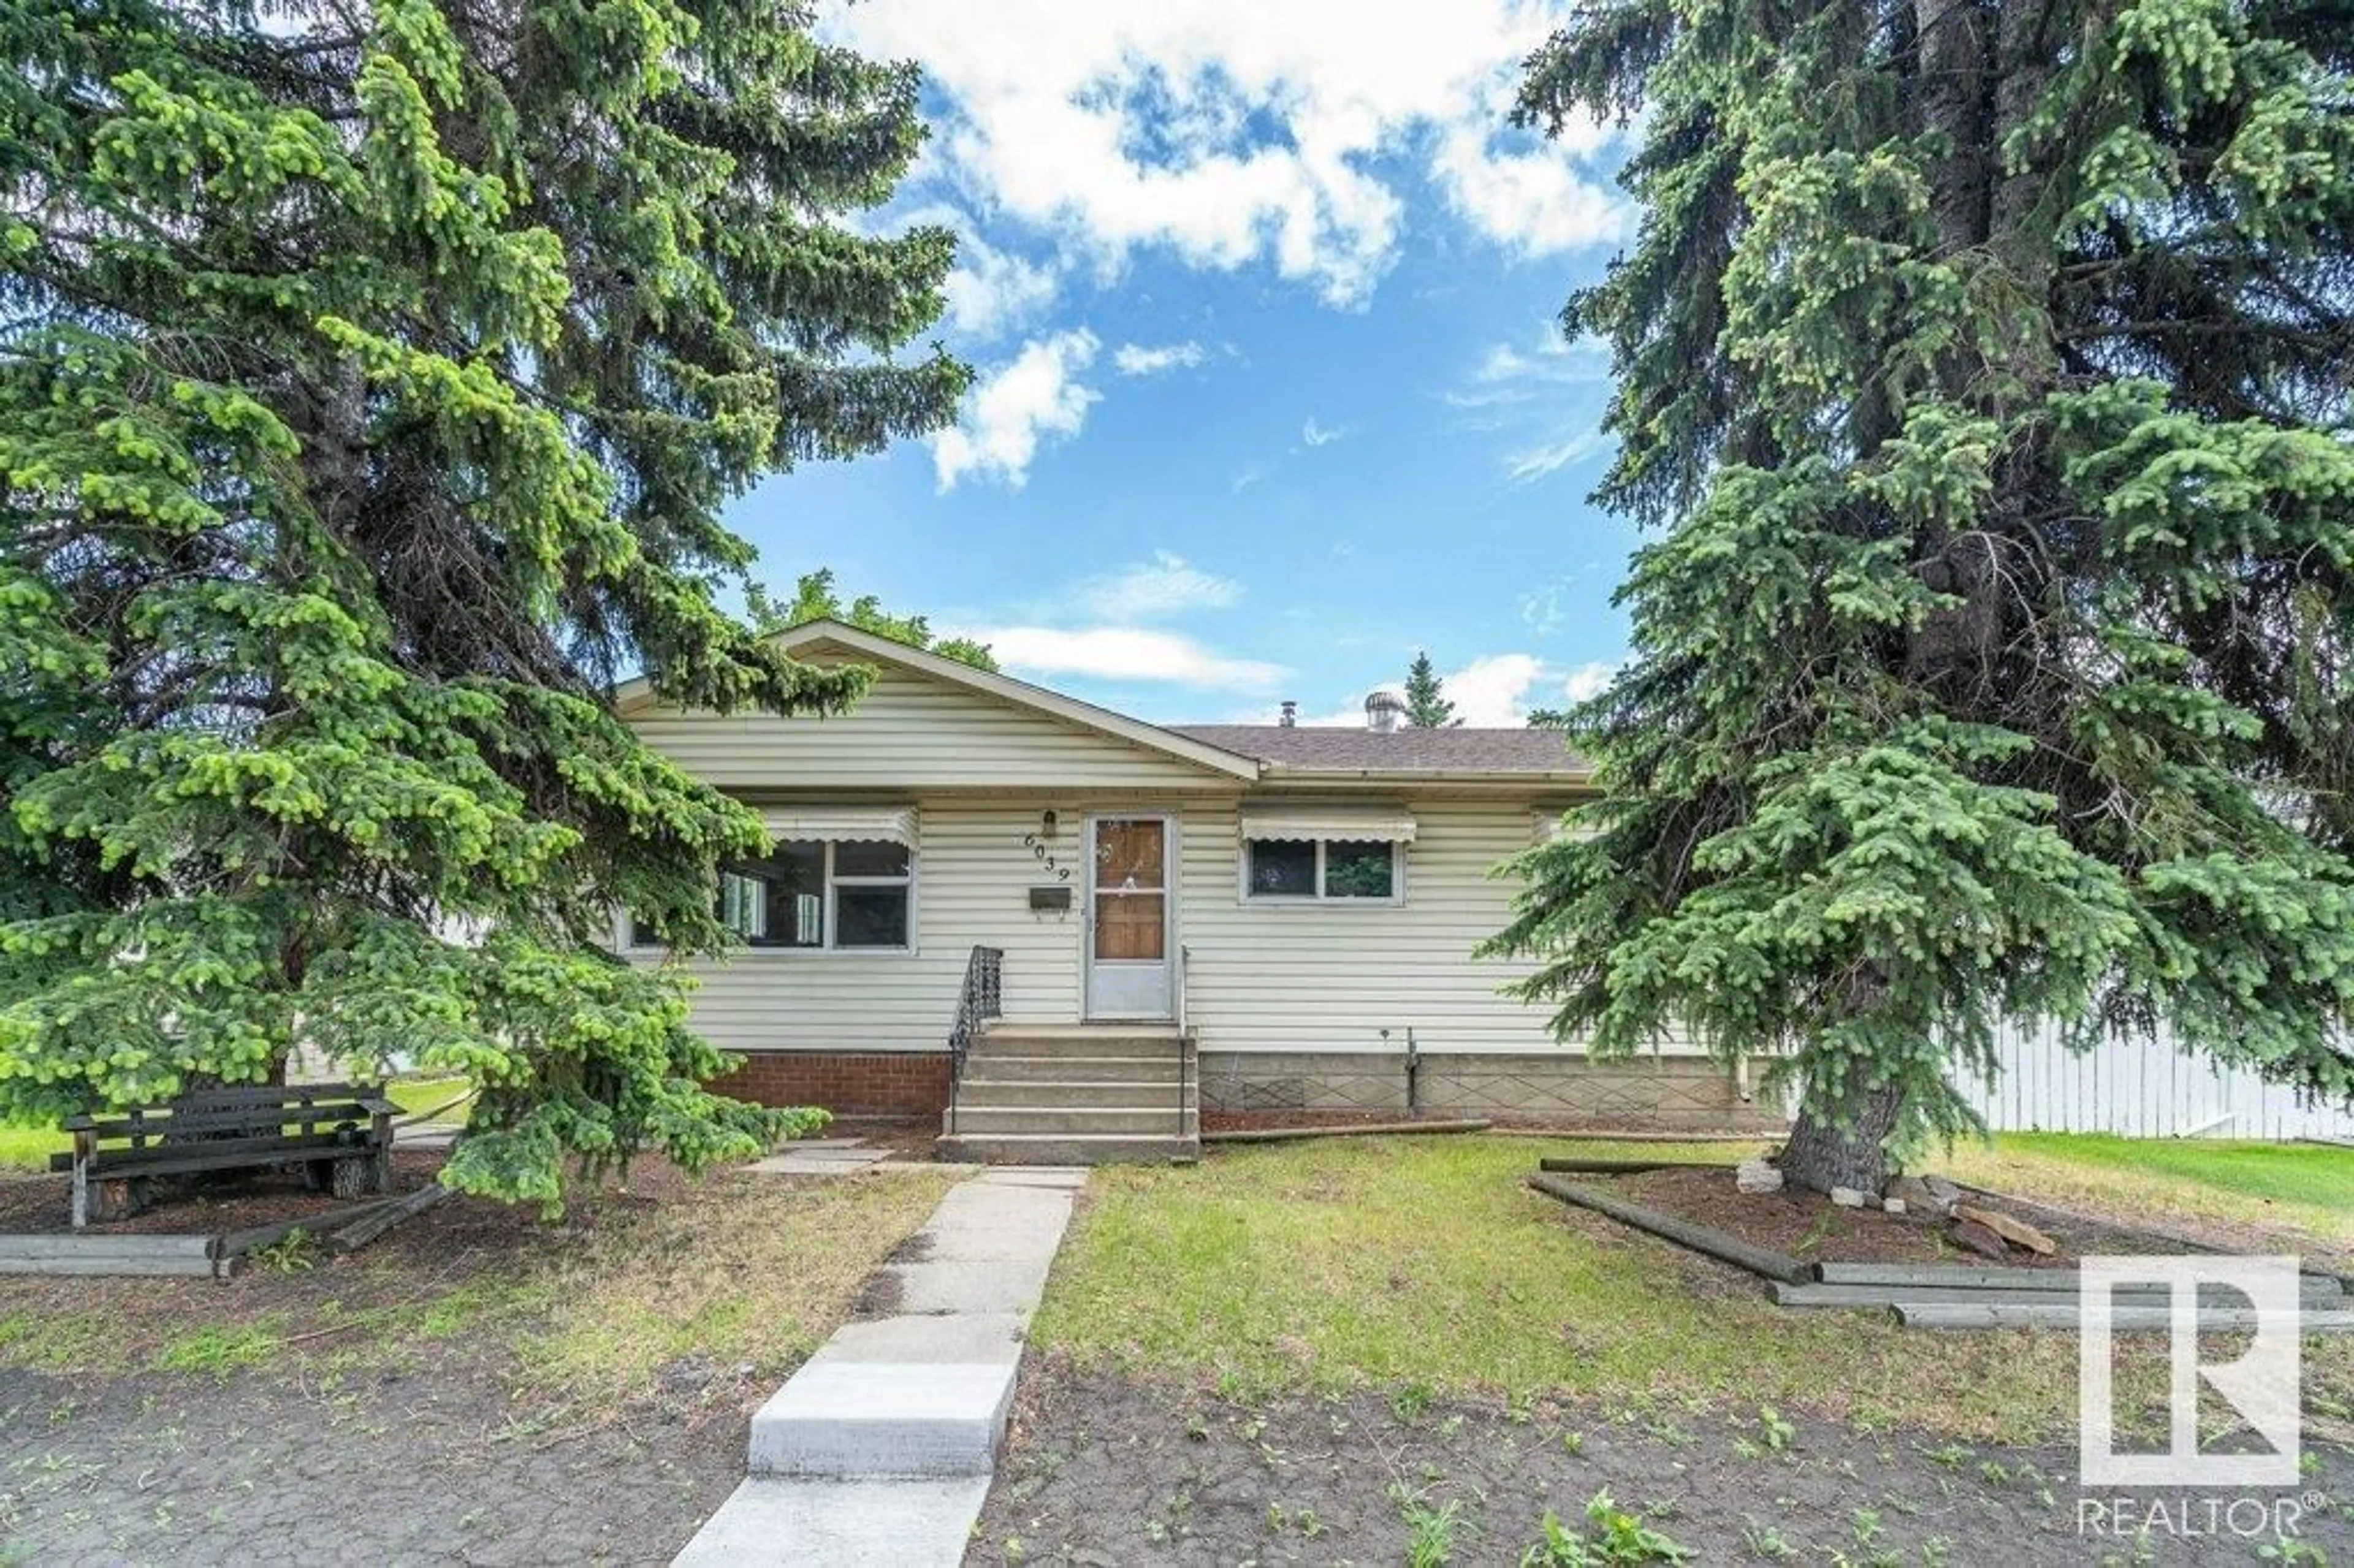 Outside view for 6039 106 ST NW, Edmonton Alberta T6H2T5